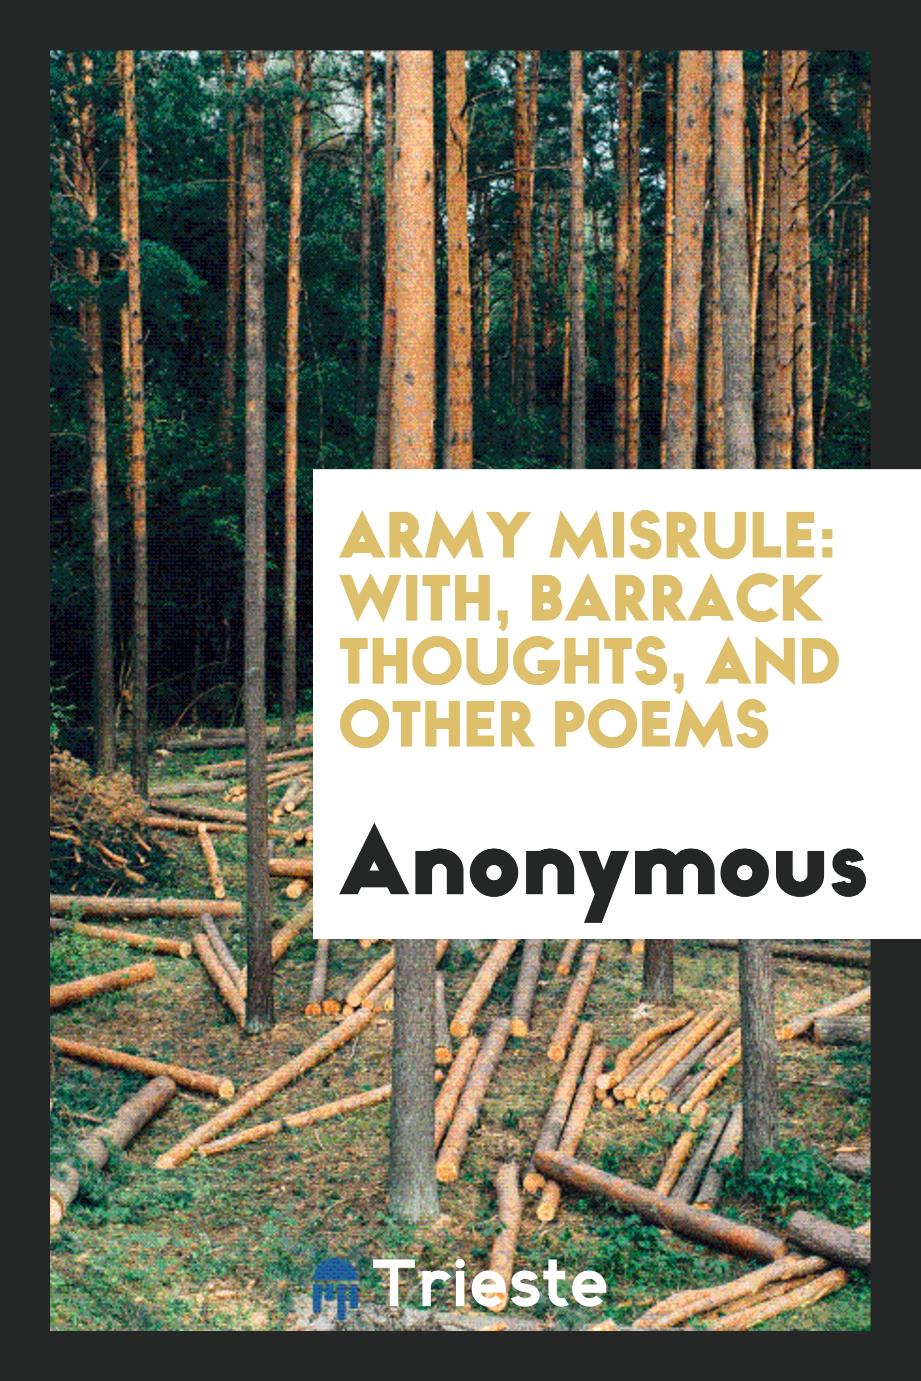 Army Misrule: With, Barrack Thoughts, and Other Poems